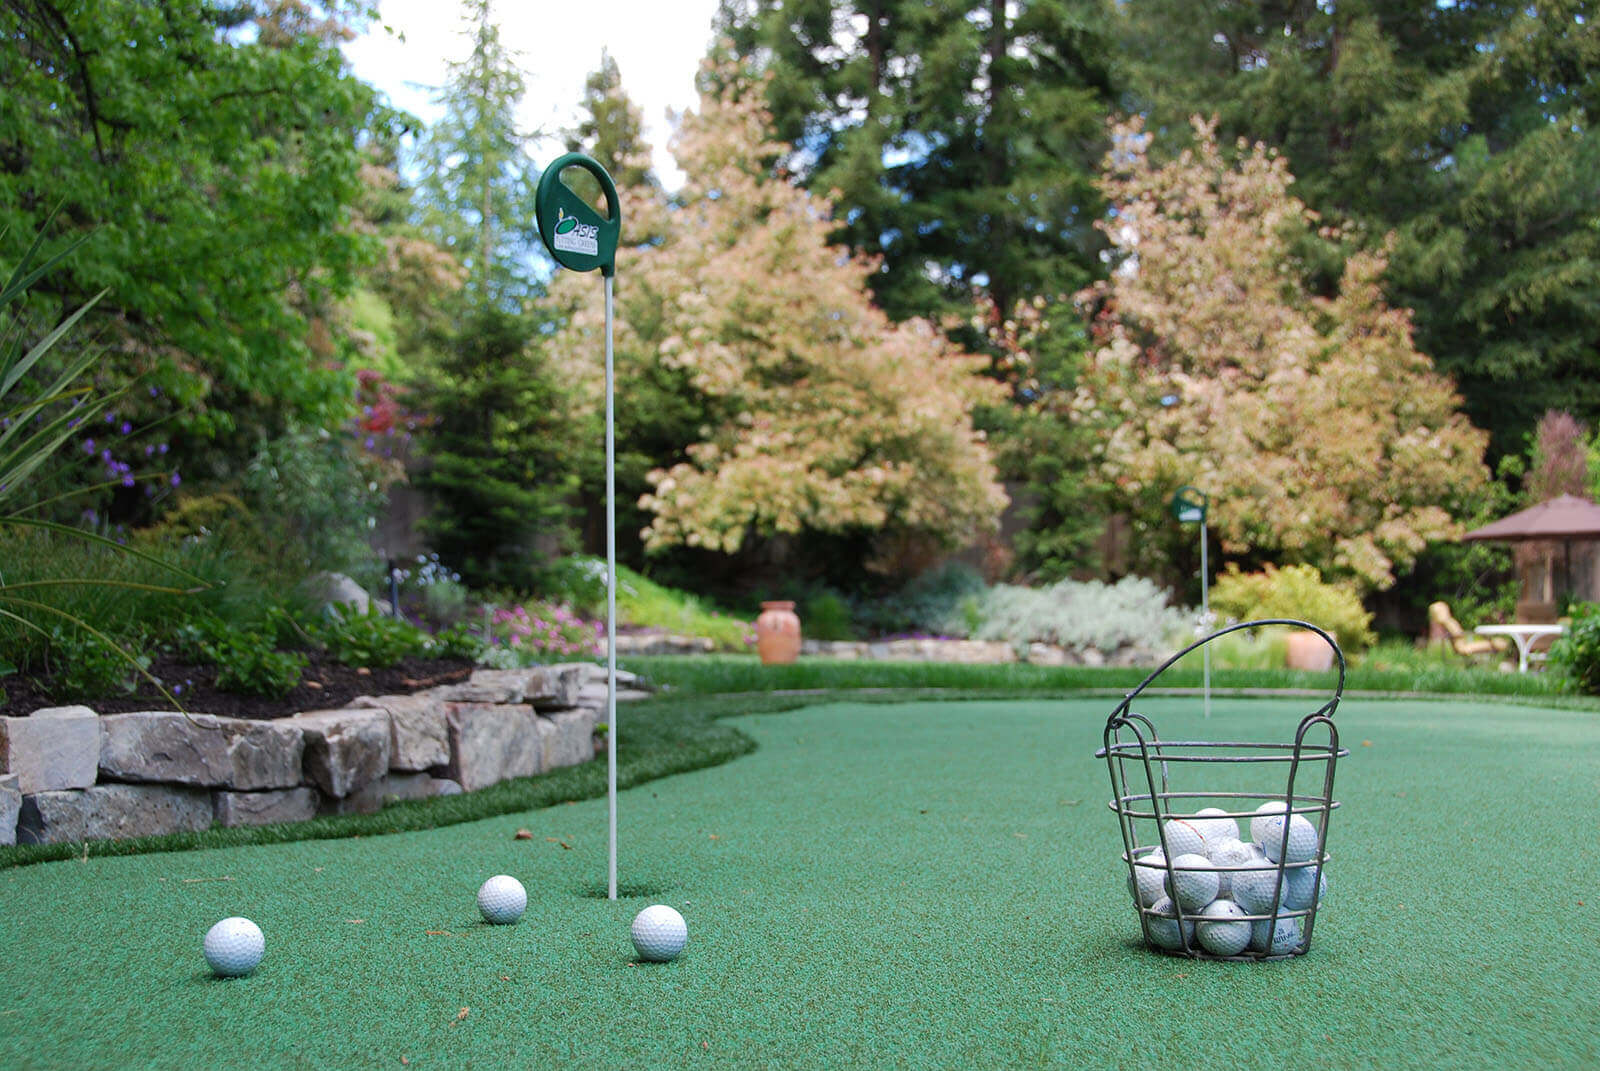 Play - Personal stone-lined putting green, with surrounding short rough zone, complete with two holes